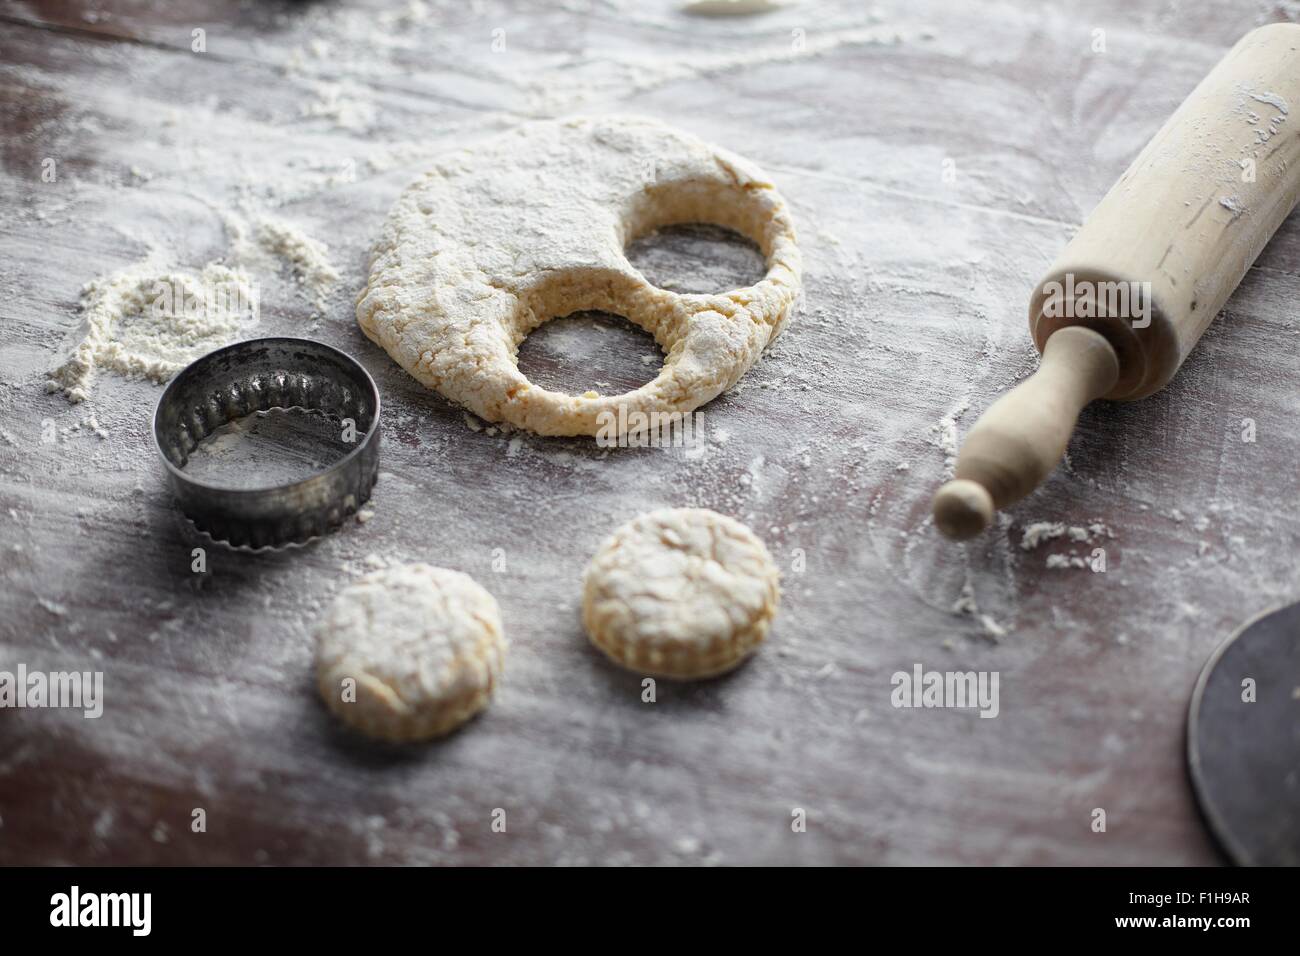 Baking preparation with scone dough and pastry cutters Stock Photo